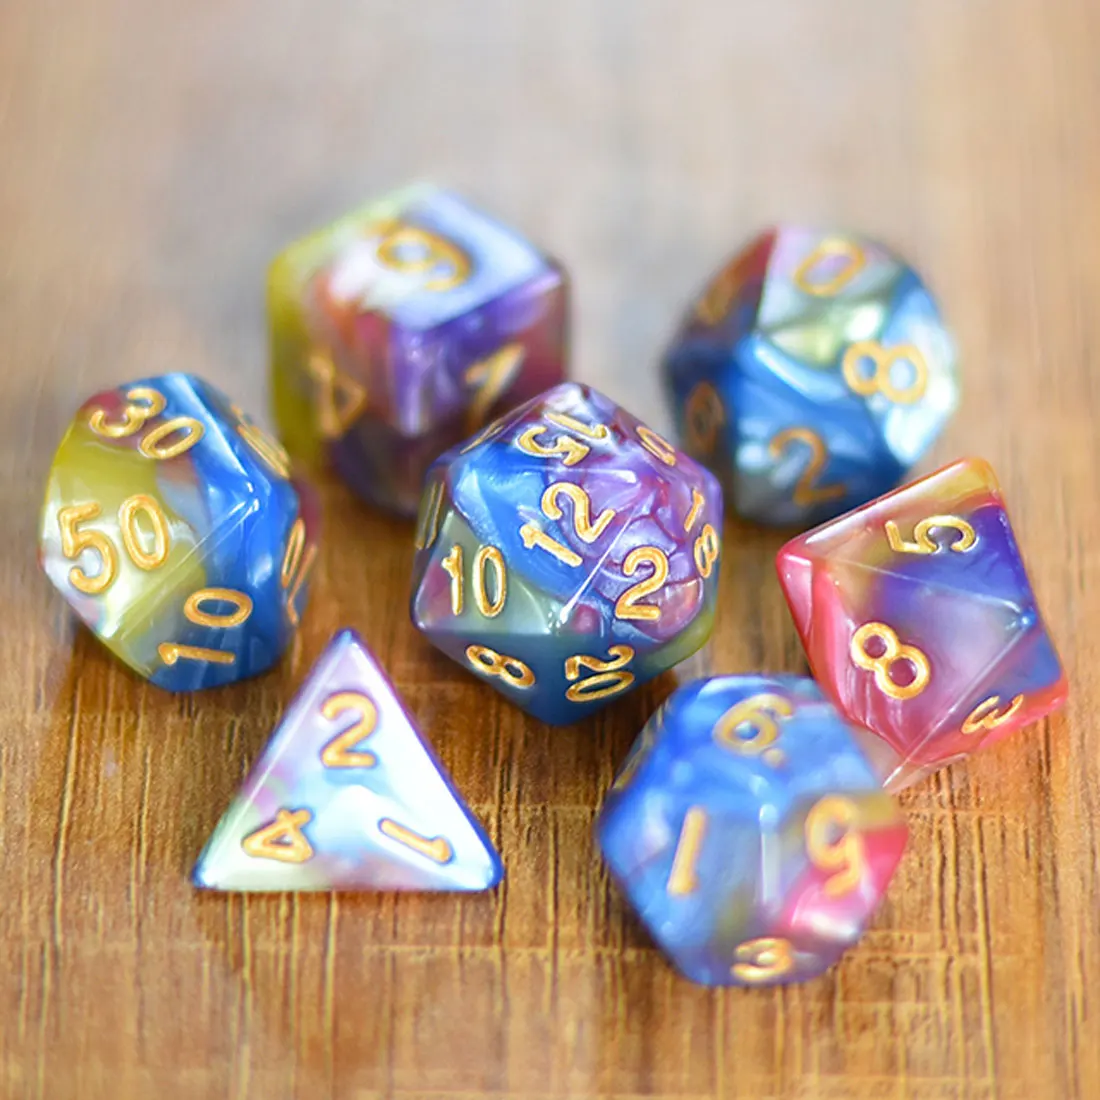 

DND Dice Set D4 D6 D8 D10 D% D12 D20 Four Color Mixing Polyhedral Dice for Dungeons and Dragon Role Playing Board Game D&D TRPG